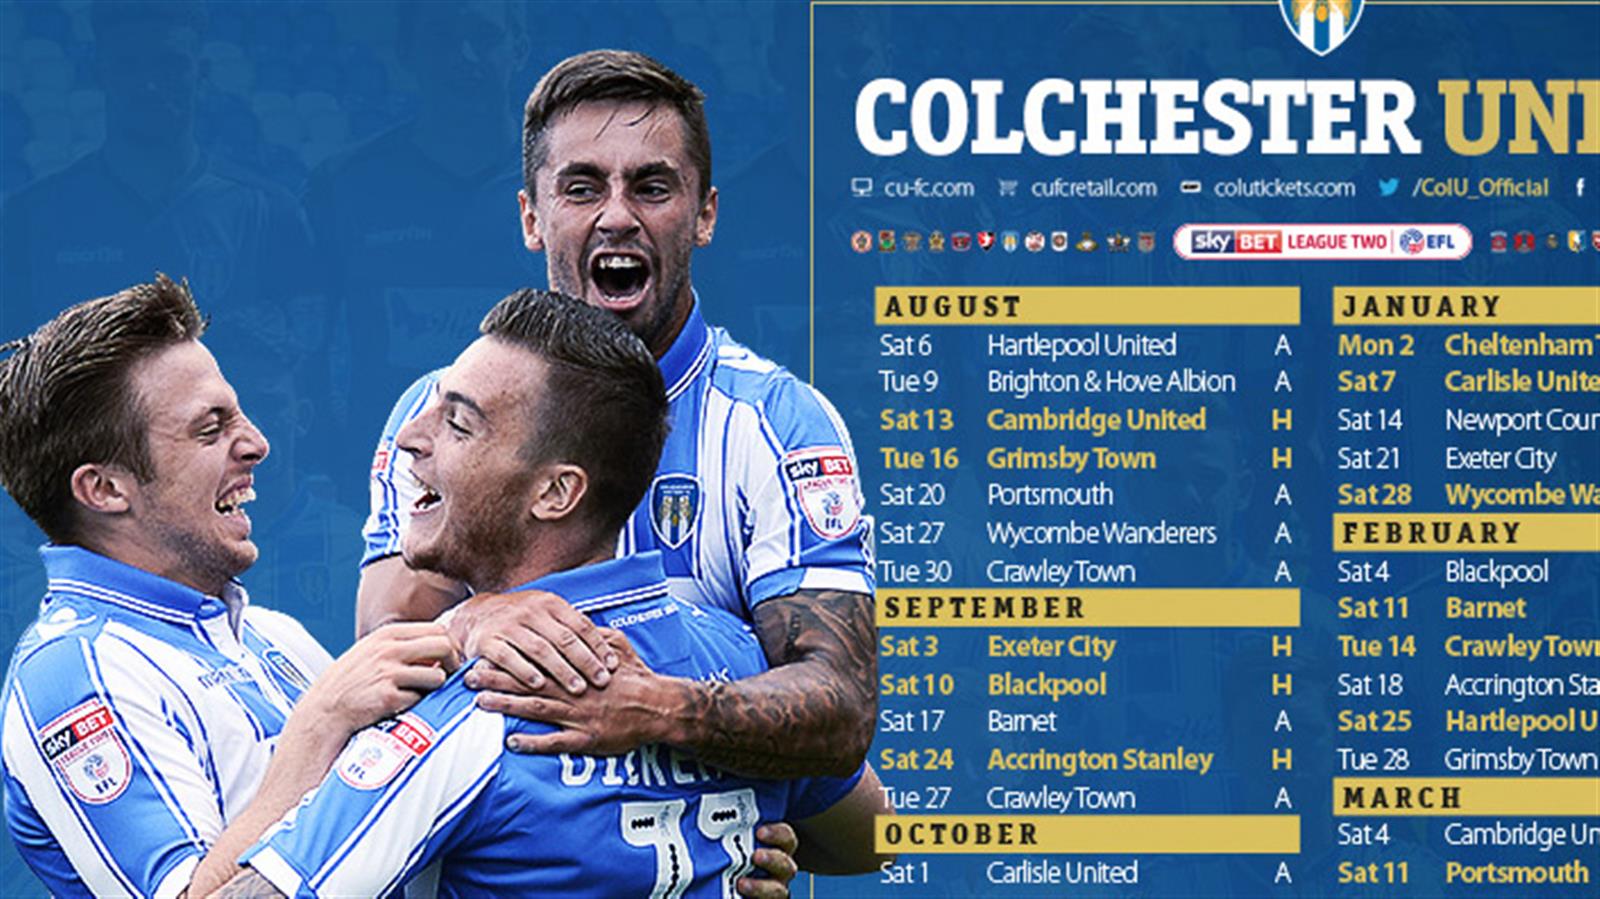 Colchester United F.C. Wallpapers